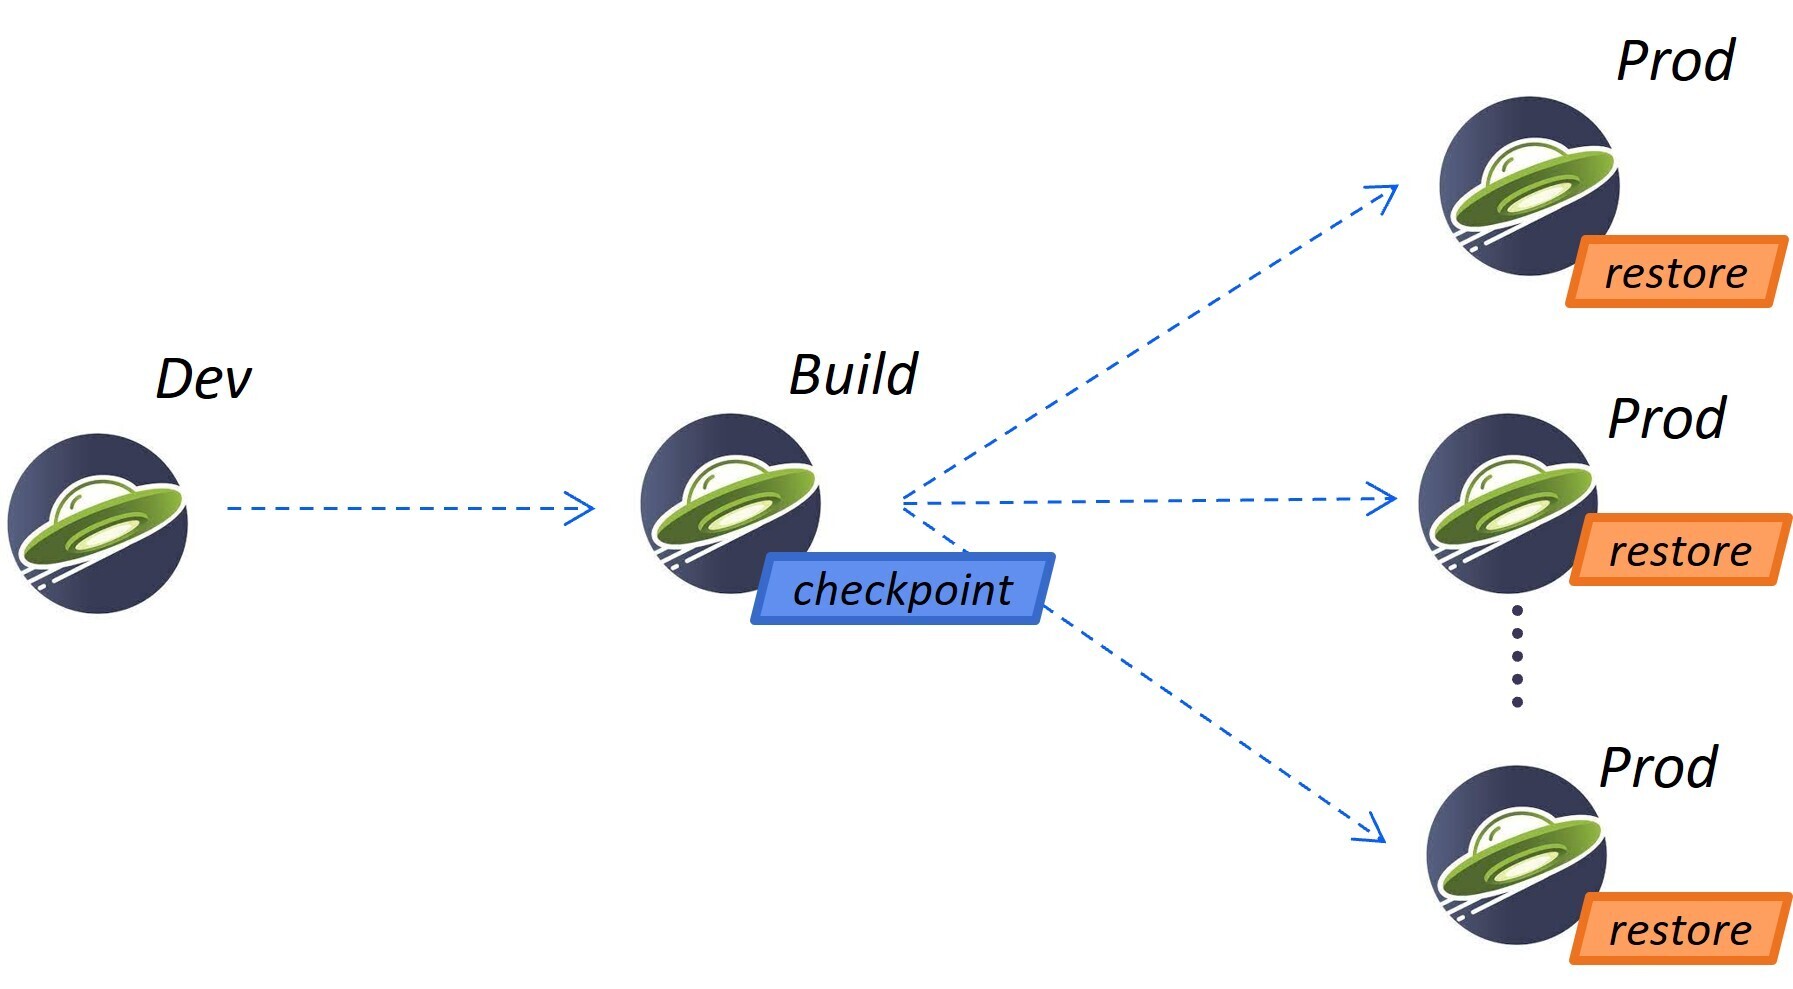 Develop your app, checkpoint during the build, restore multiple instances of the checkpointed app to production.